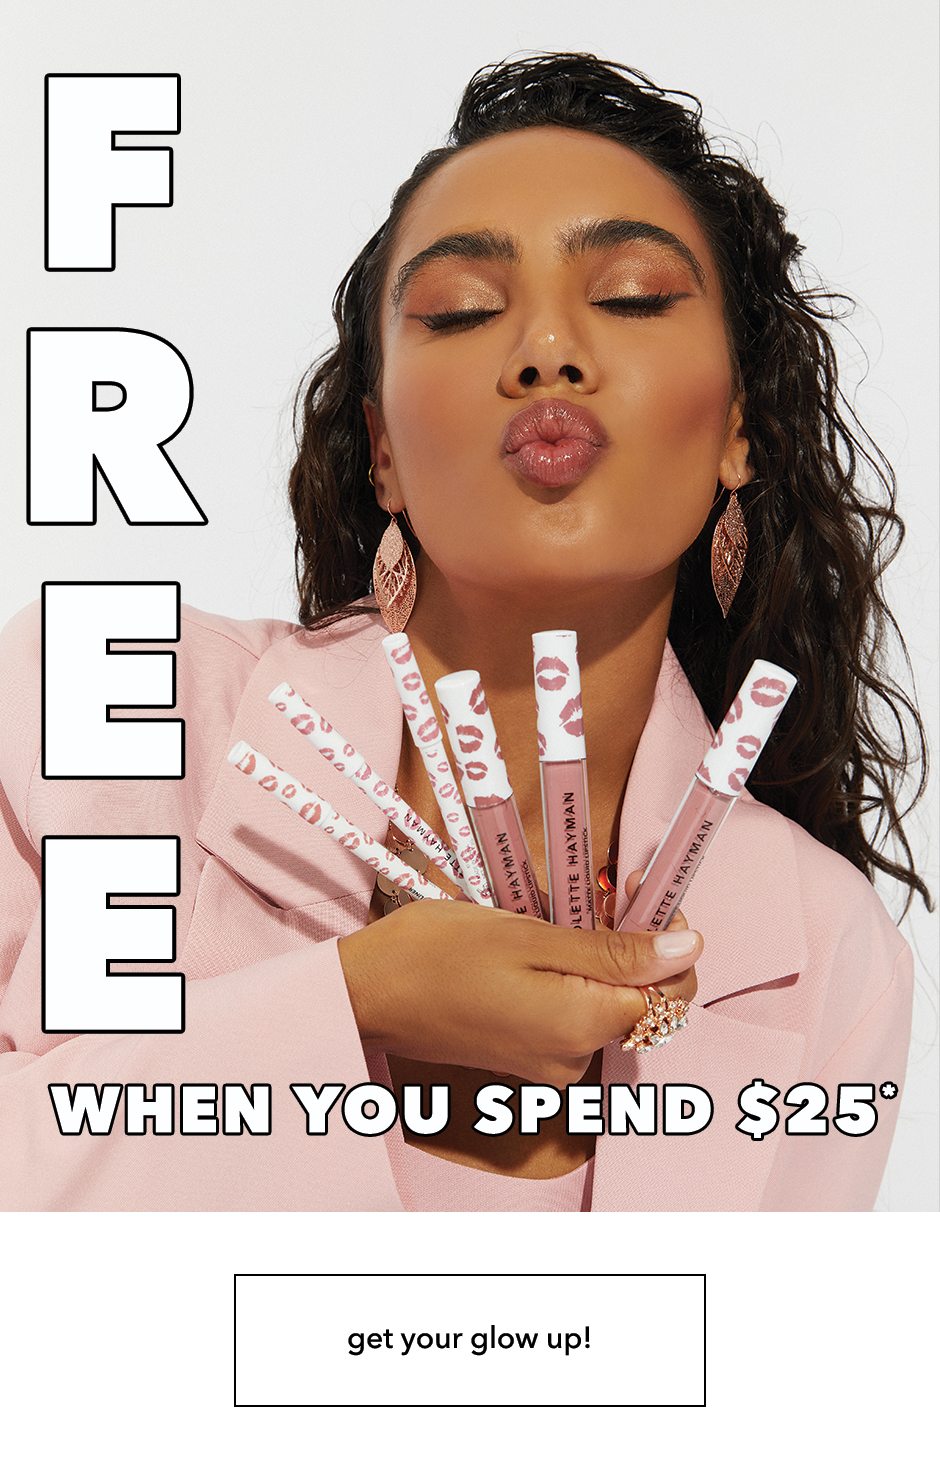 FREE Lip Kit when you spend $25*